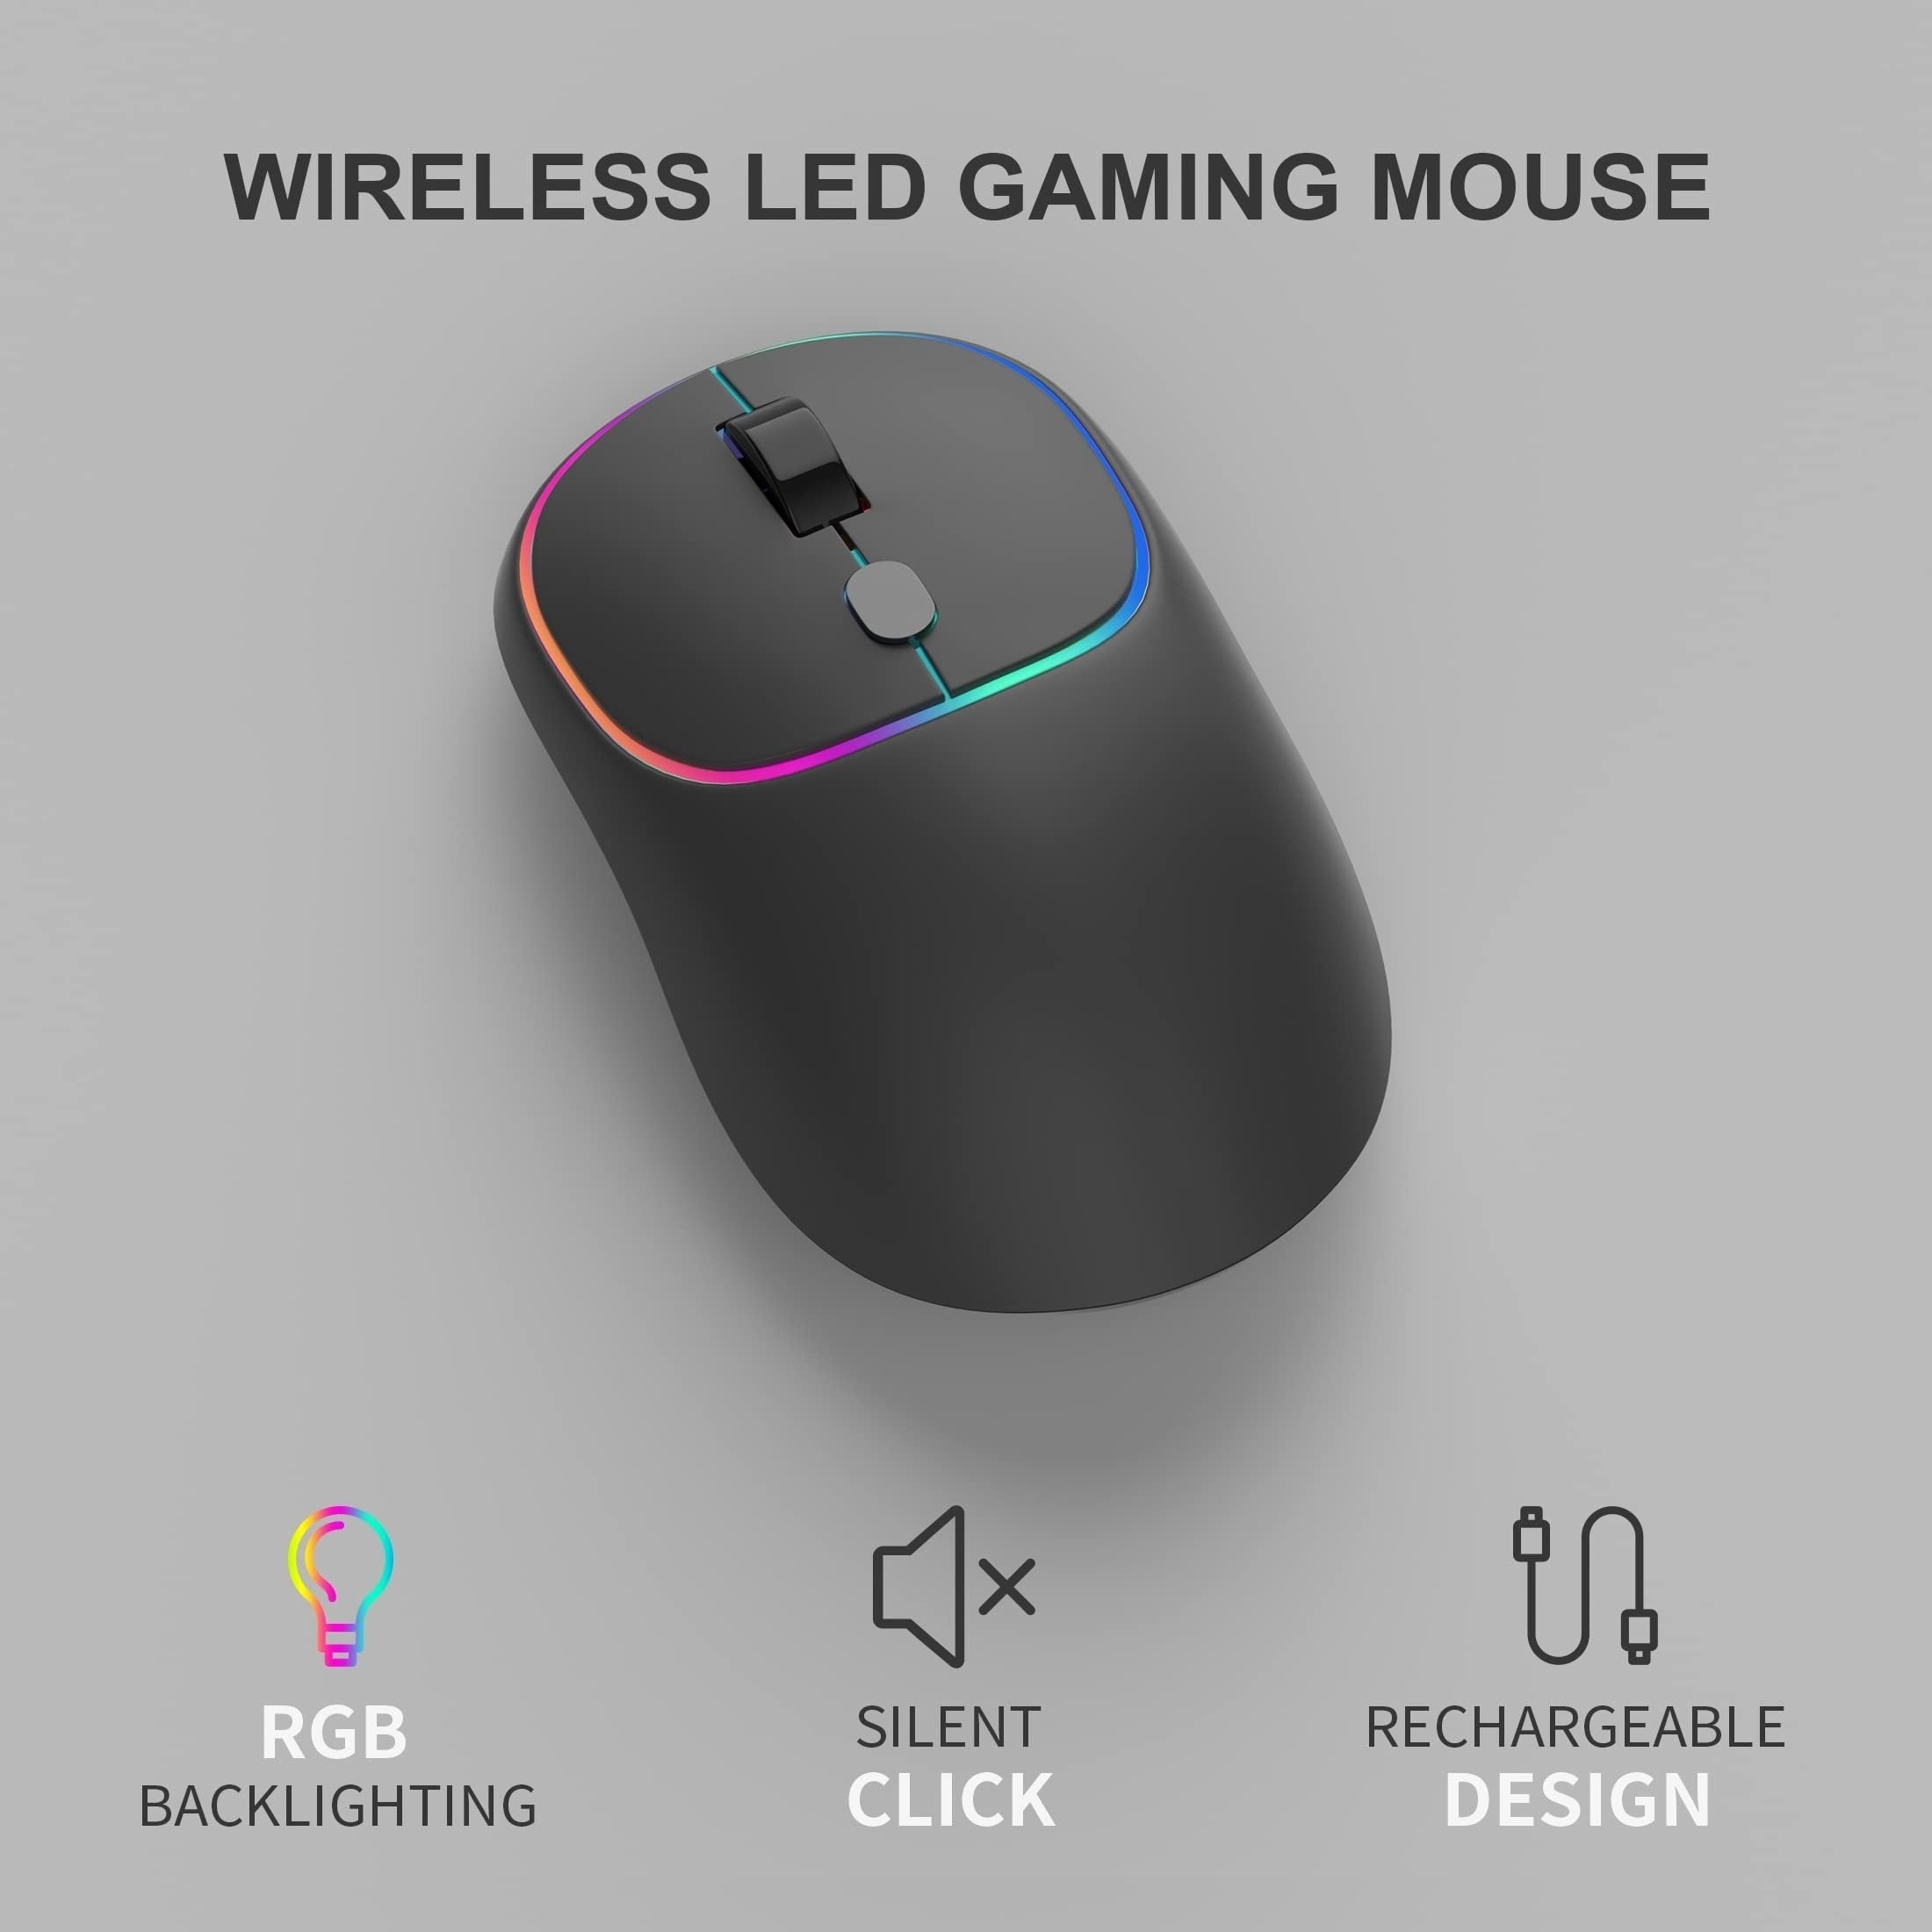 Upgrade Your Gaming Experience with the MageGee V550 Wireless Keyboard & Mouse Combo!